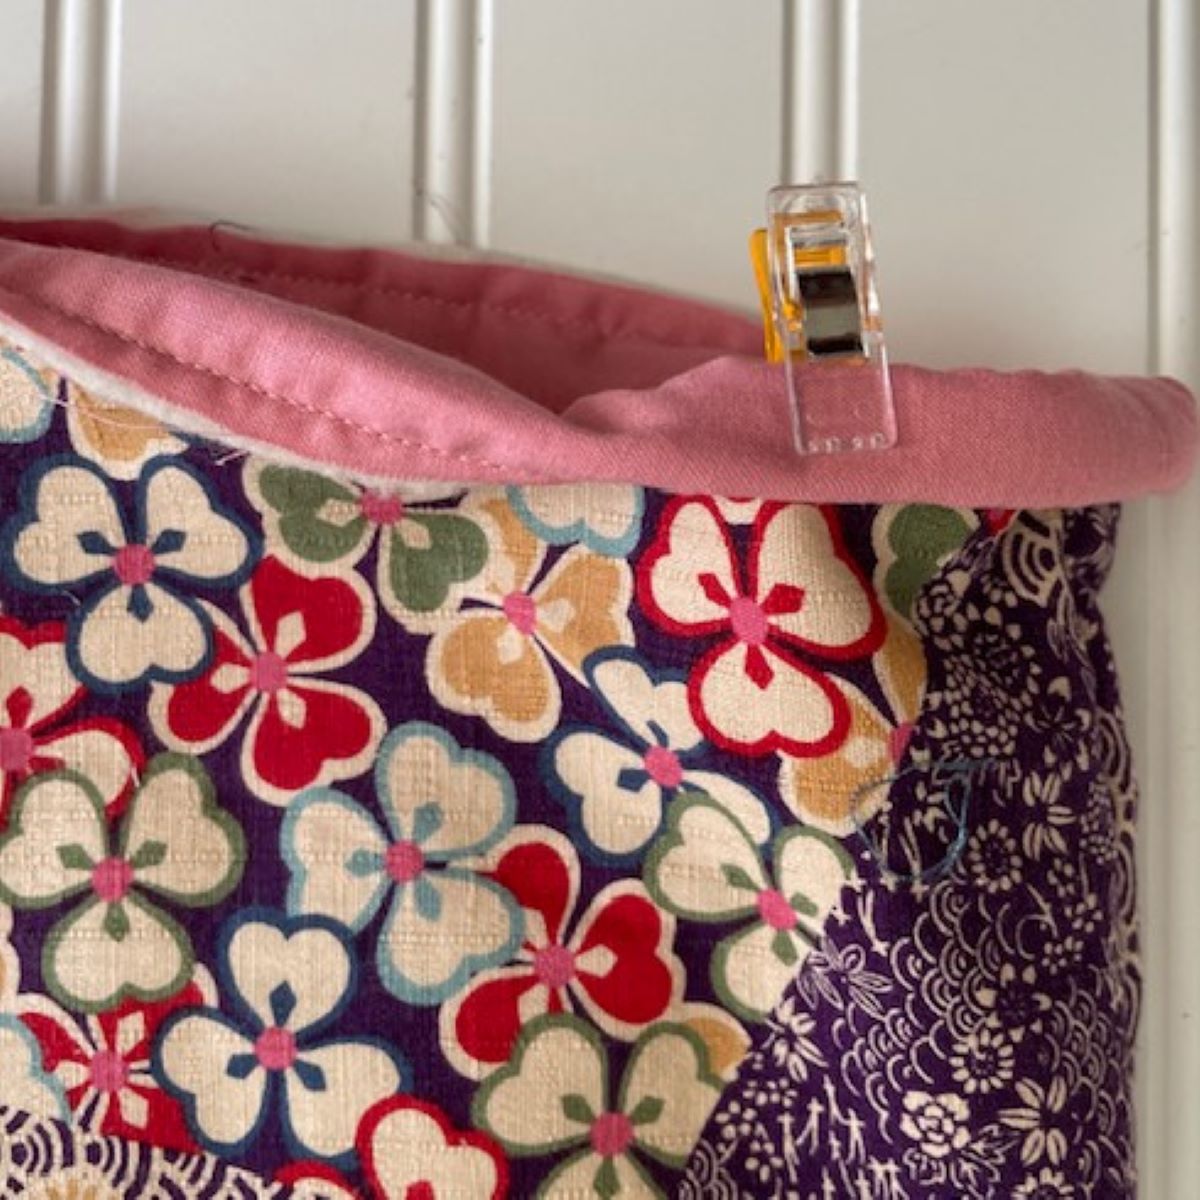 How to Sew a Mini Organizing Collection - WeAllSew